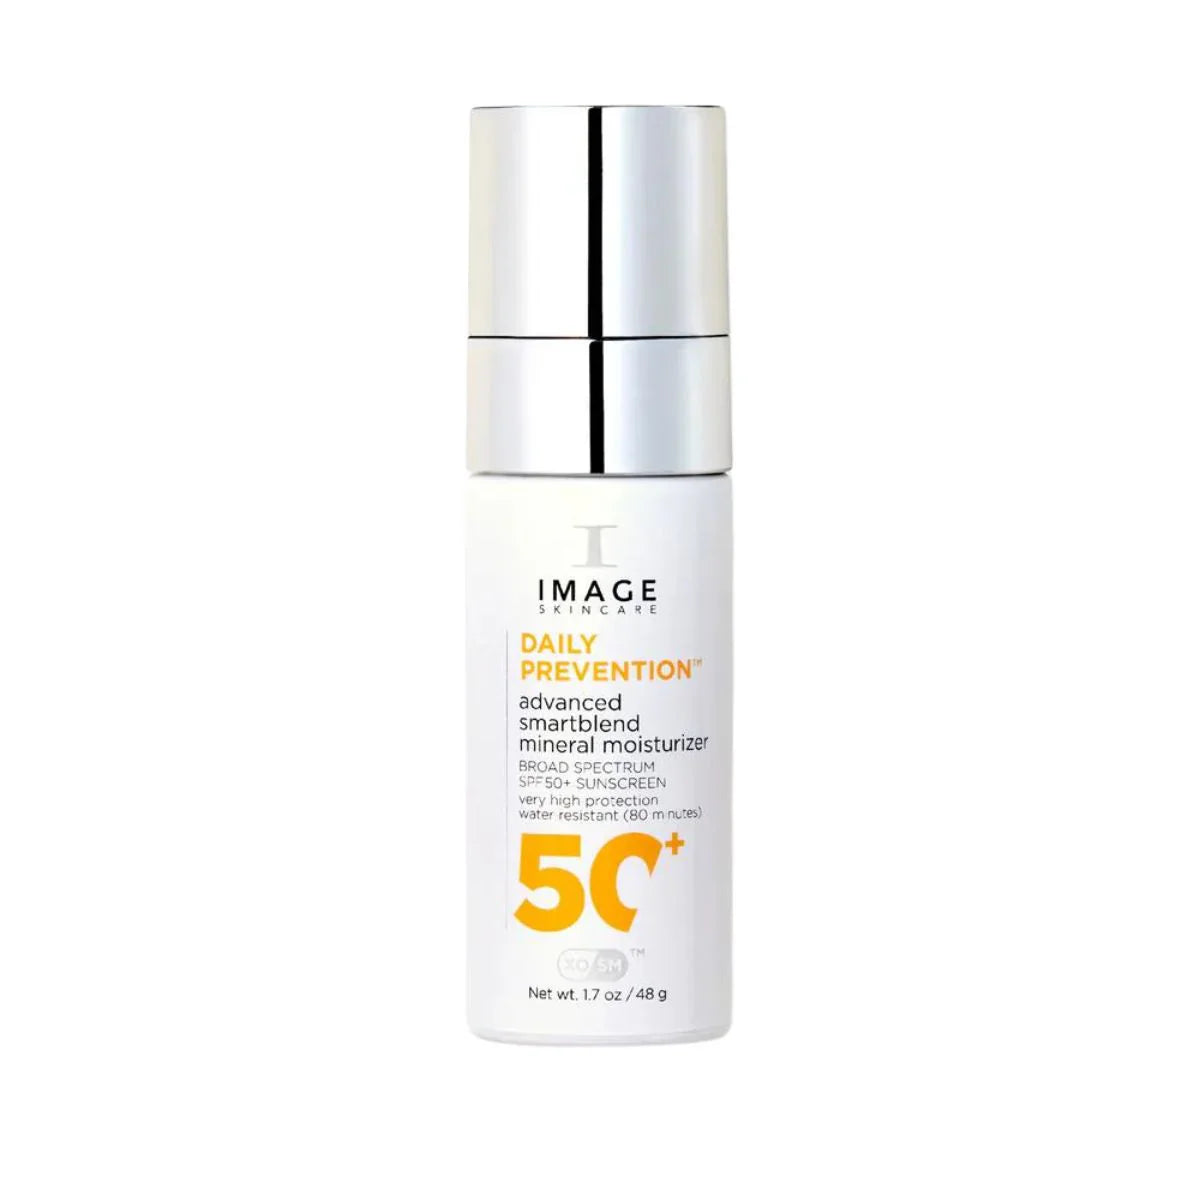 IMAGE Daily Prevention Advanced Smart Blend Mineral SPF 50